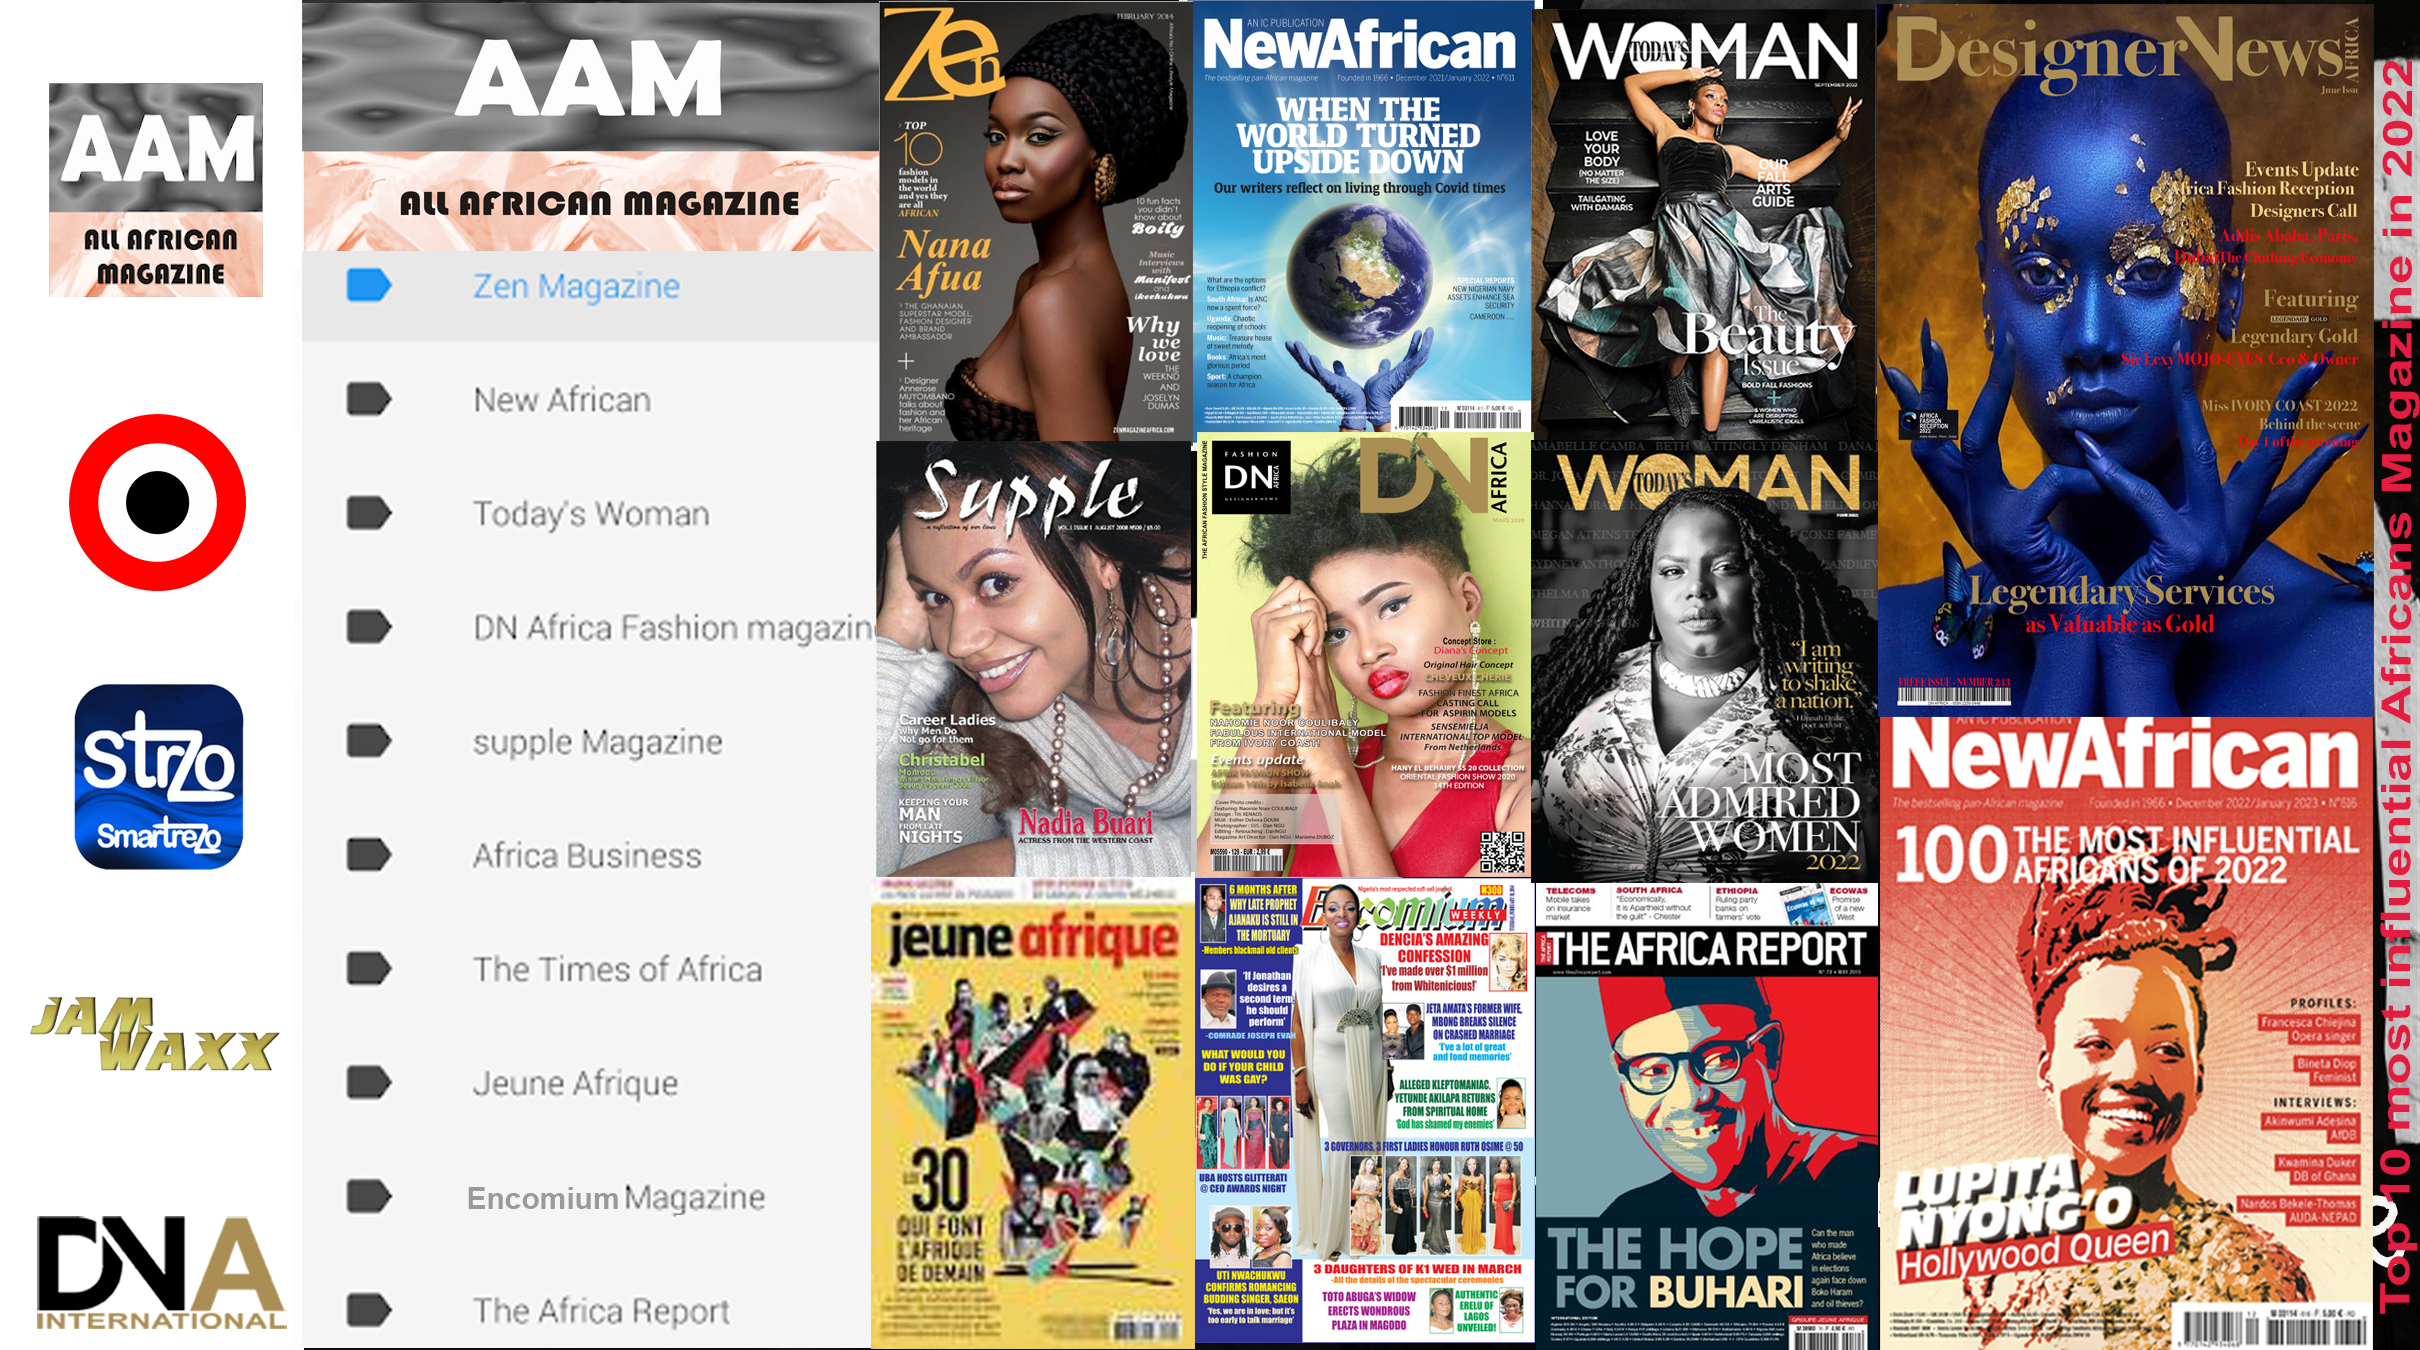 AAM – ALL AFRICAN MAGAZINE – Top 10 most influential Africans Magazine in 2022